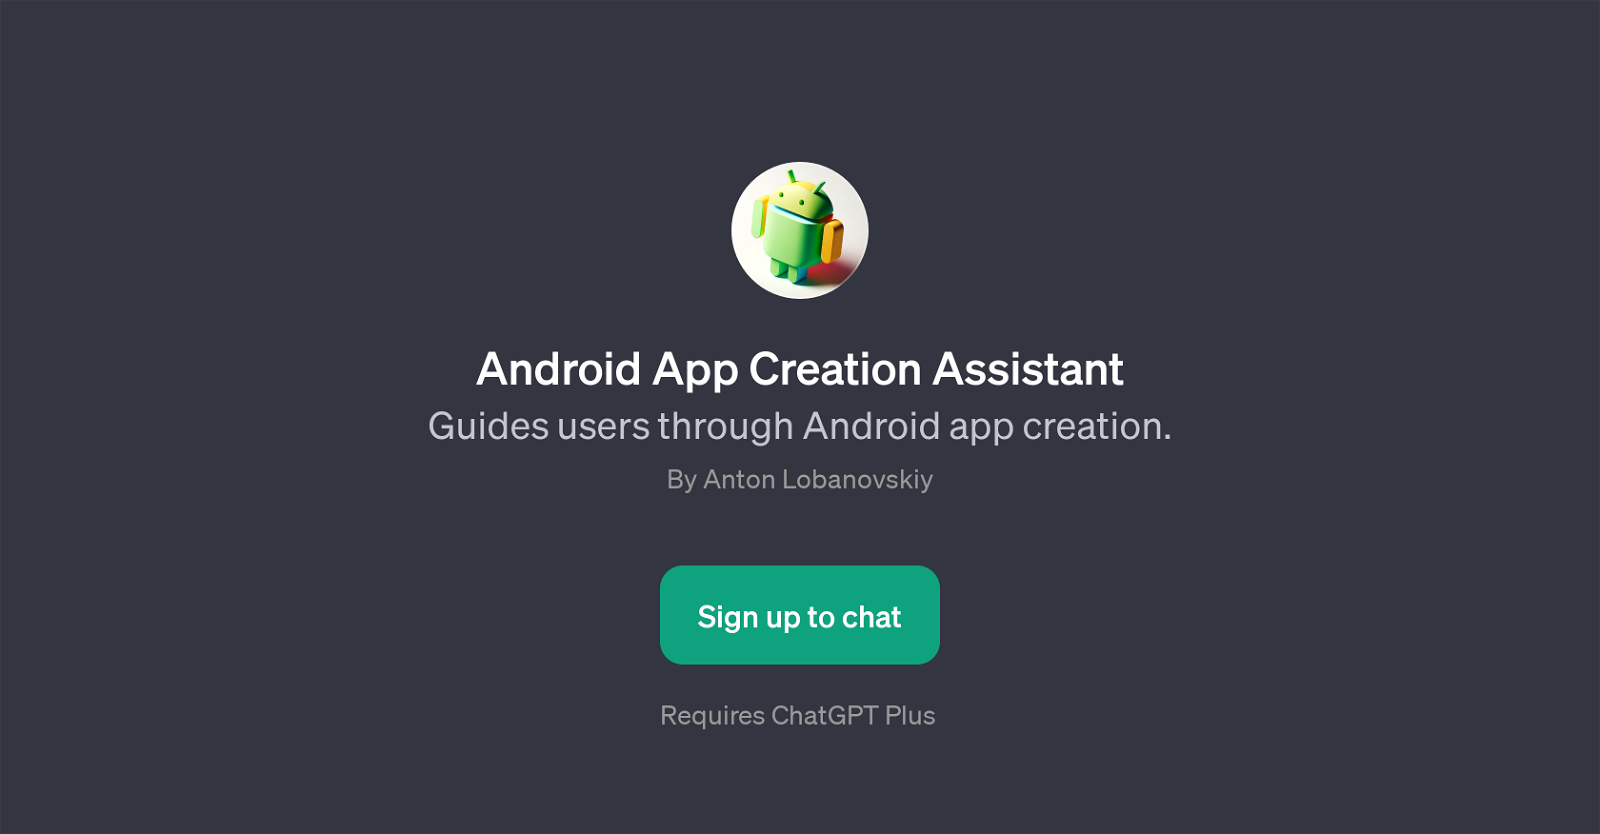 Android App Creation Assistant website